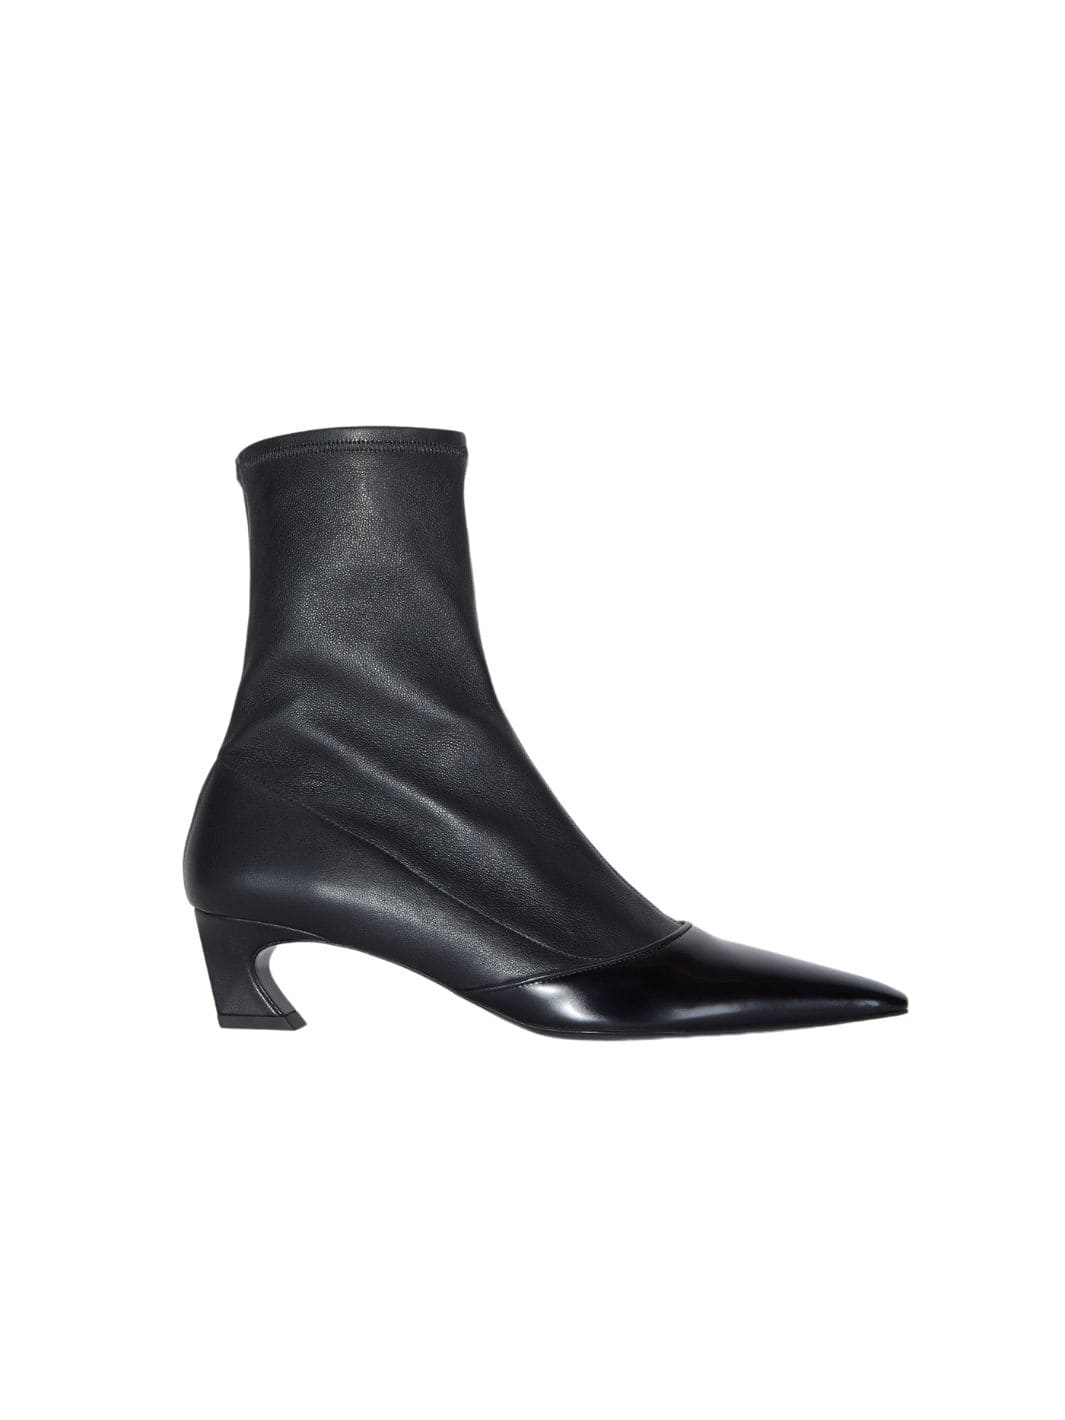 Acne Studios Shoes Boots | Heeled Ankle Boots Black